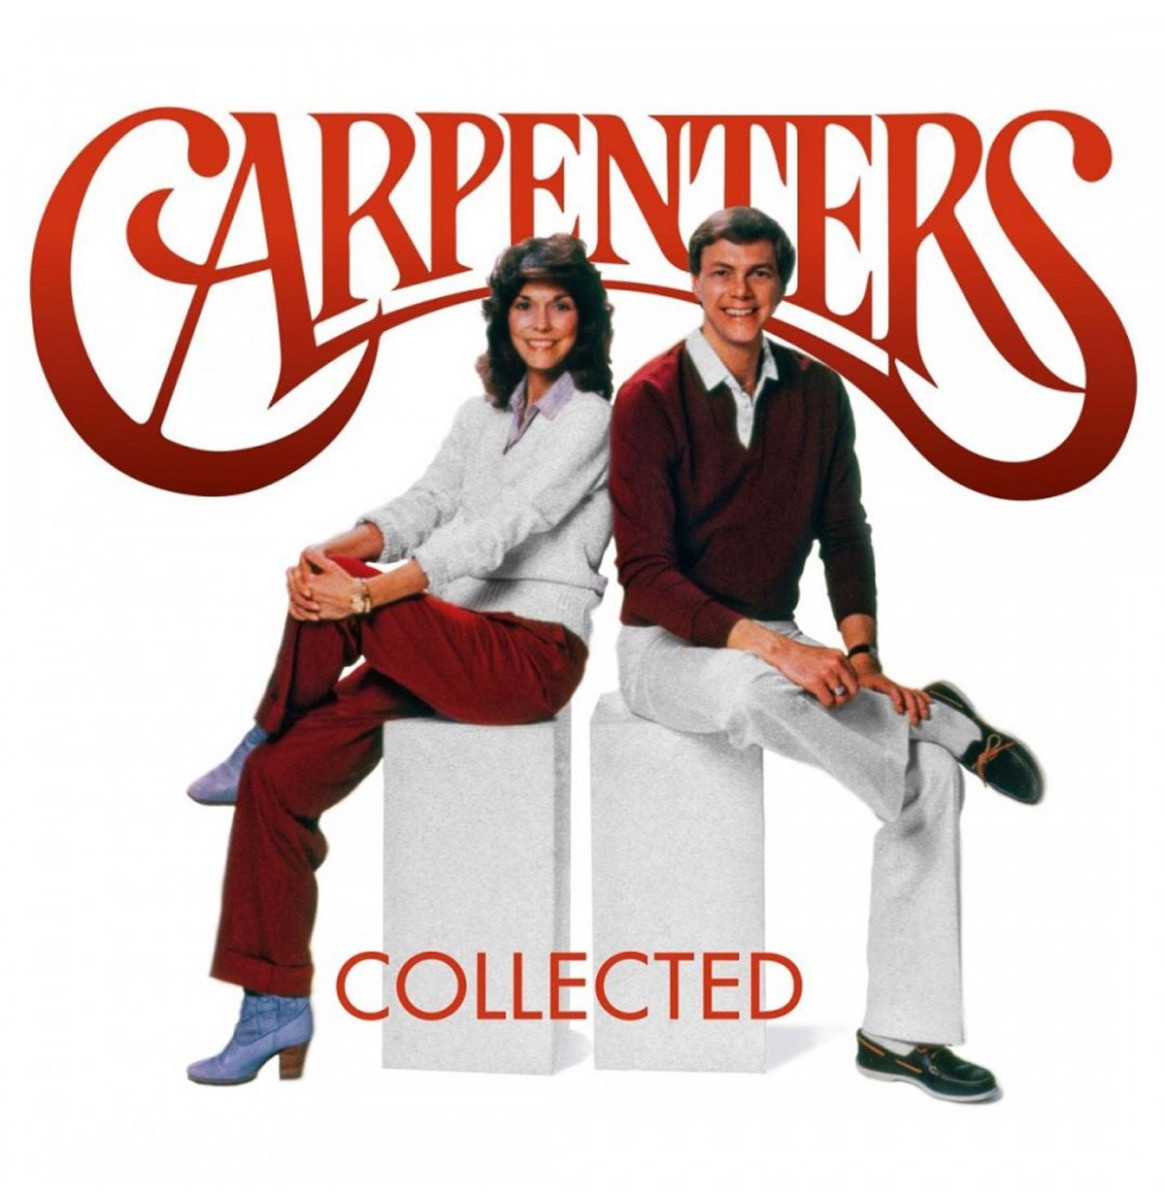 The Carpenters - Collected 2LP